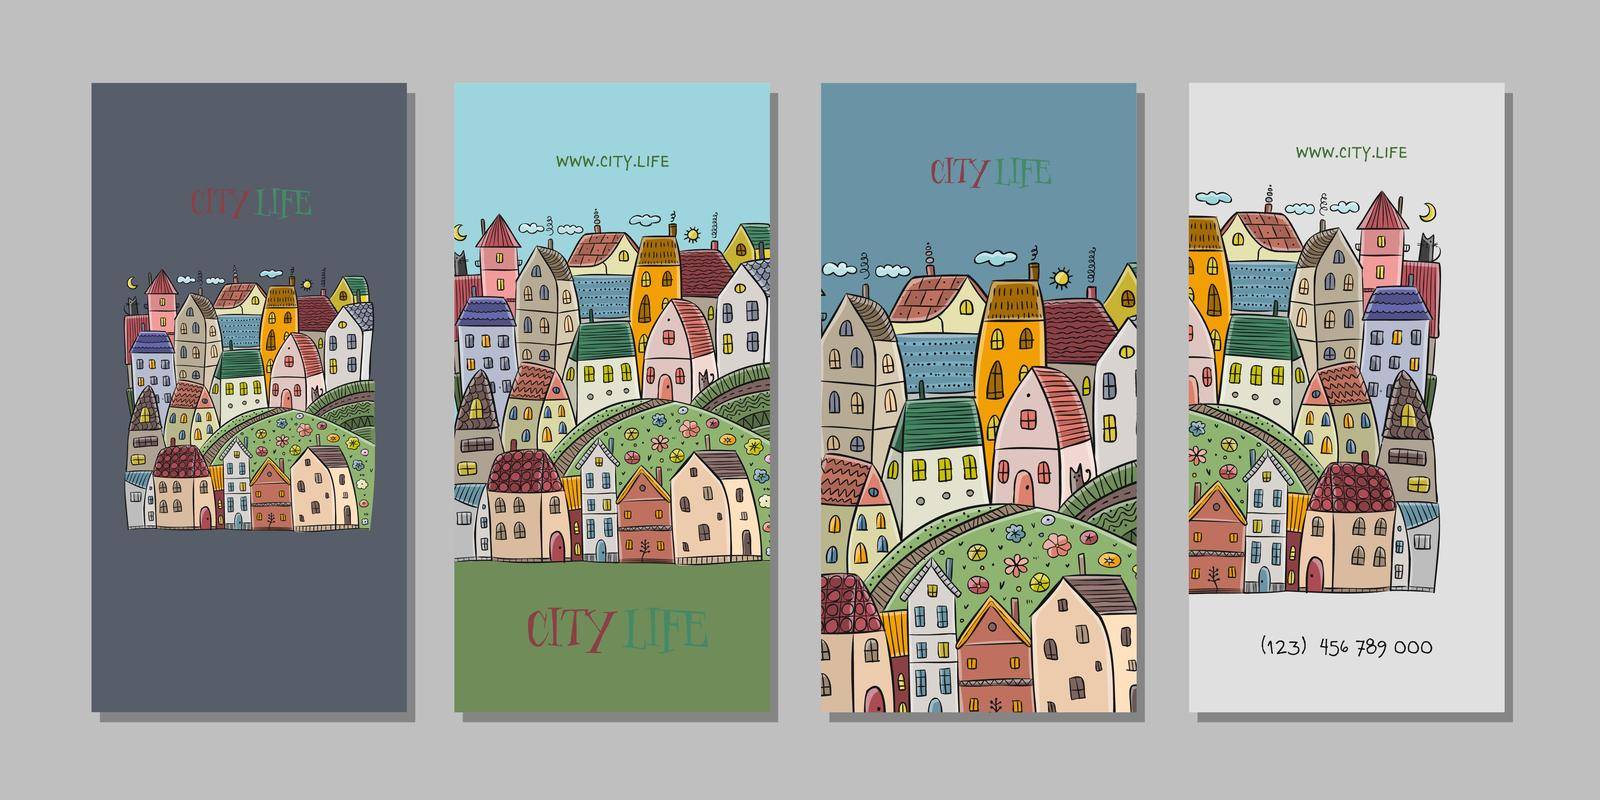 Vintage old city, cute houses. Concept art for your business. Creative ideas for cards, banner, web, promotional materials. Corporate identity template